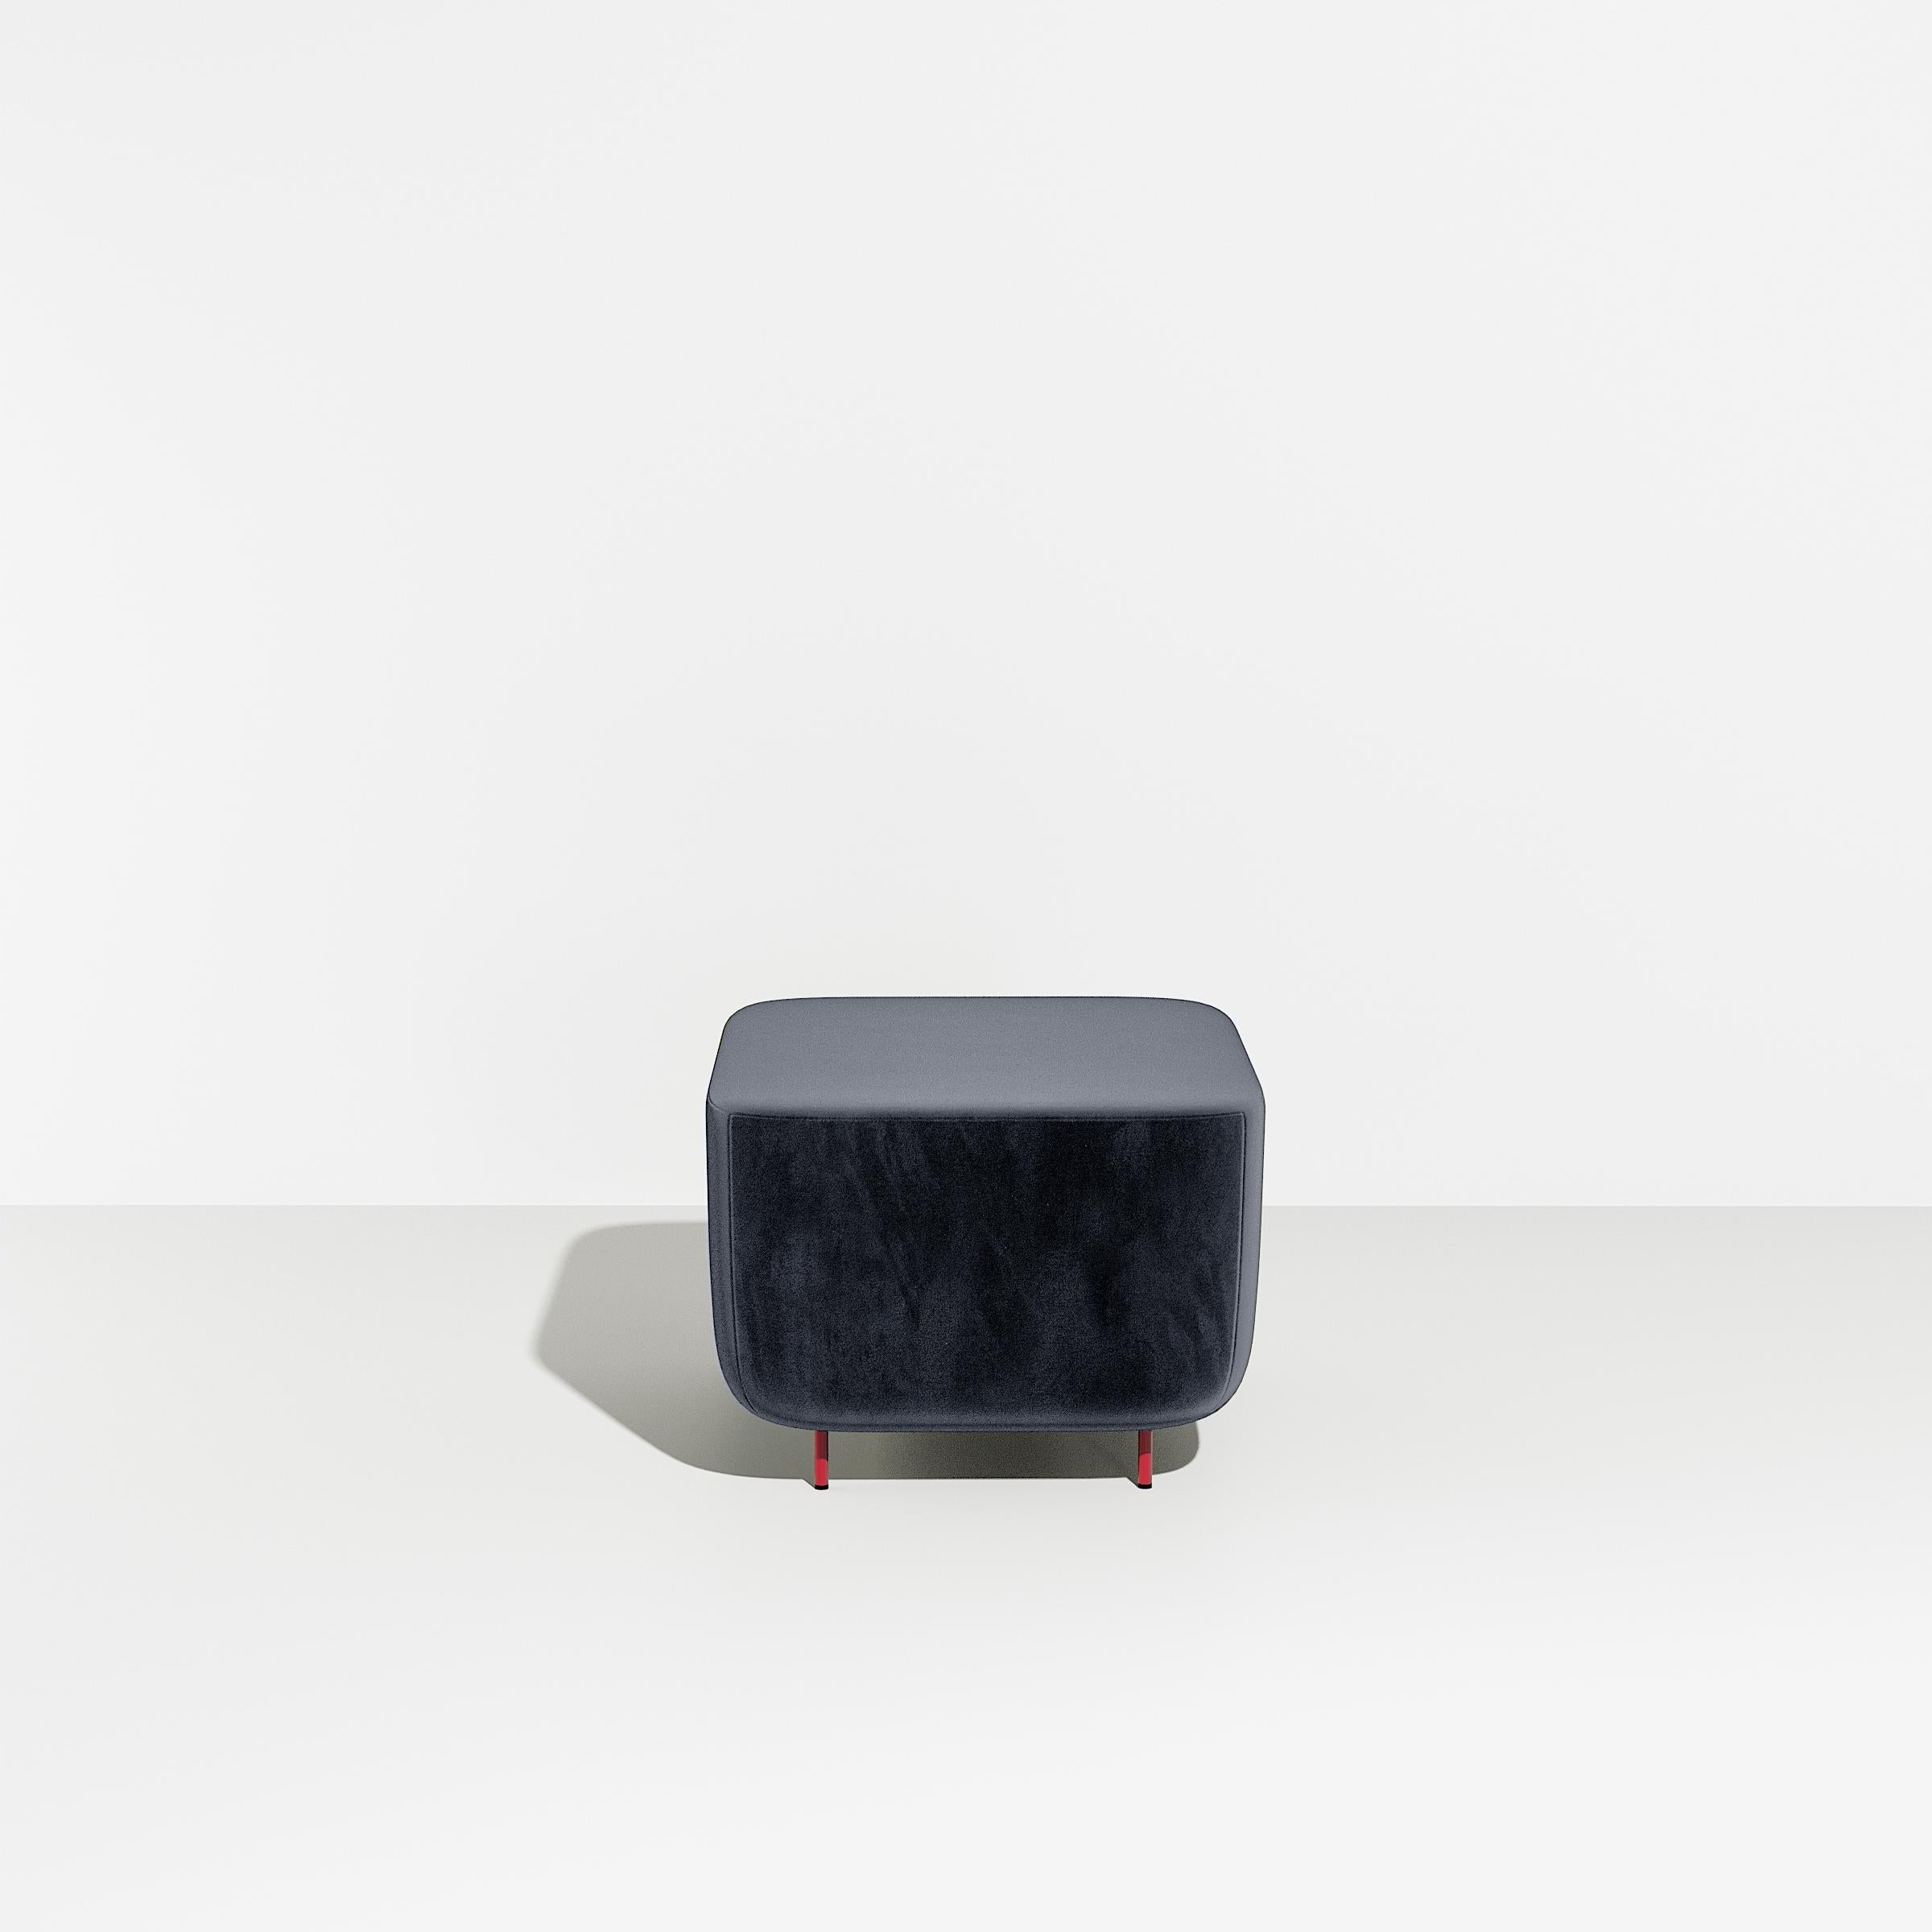 Petite Friture Small Hoff Stool in Grey-blue by Morten & Jonas, 2015

Hoff created by designer duo Morten & Jonas is a collection of two modular stools and two modular armchairs. they can combine to make a sofa as well an entire living room area.